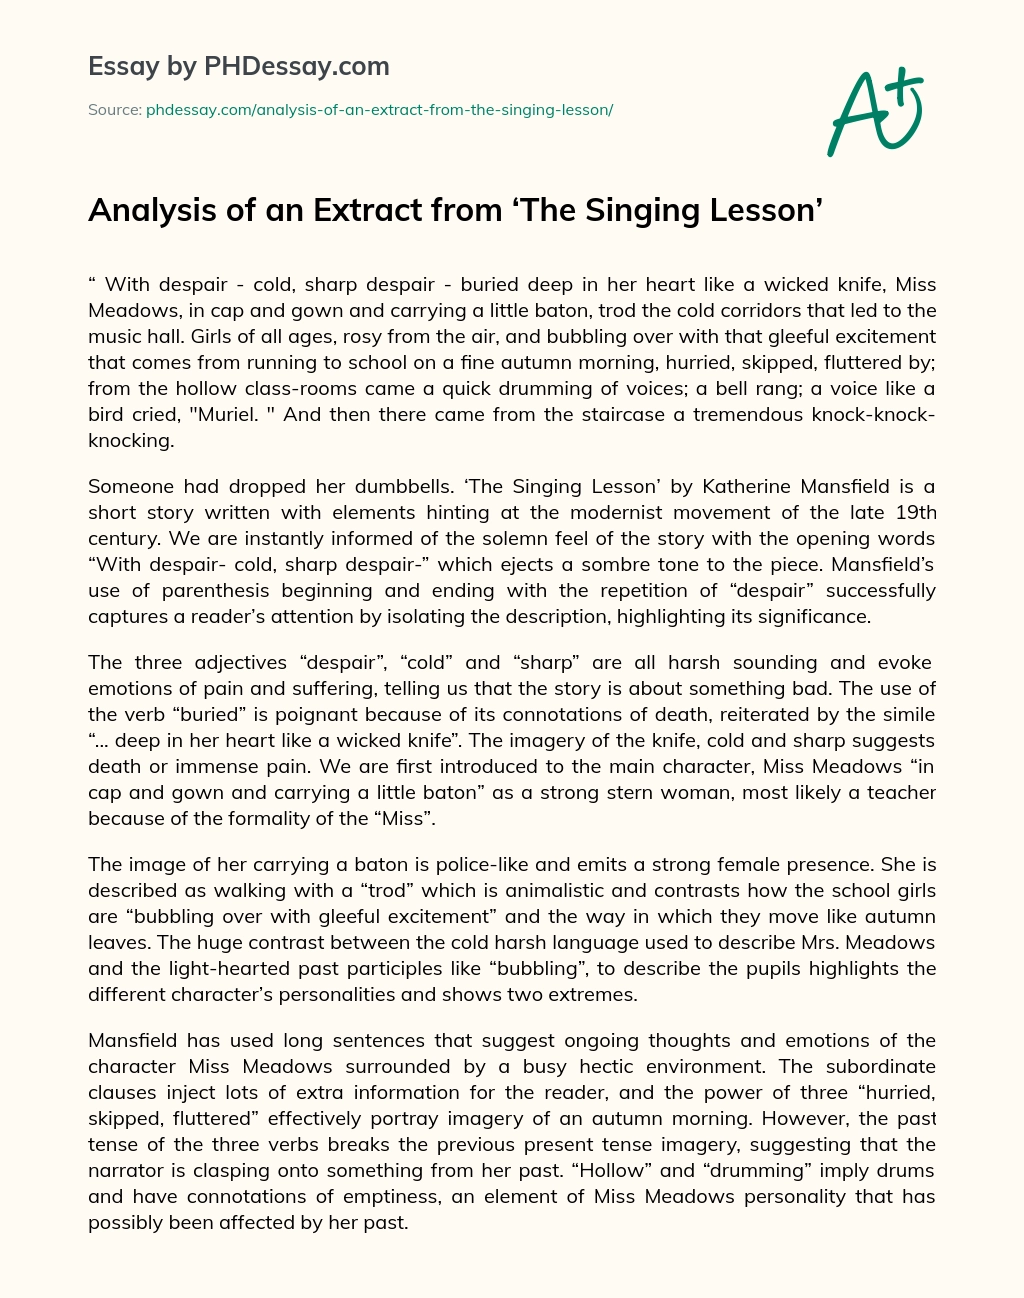 Analysis of an Extract from ‘The Singing Lesson’ essay